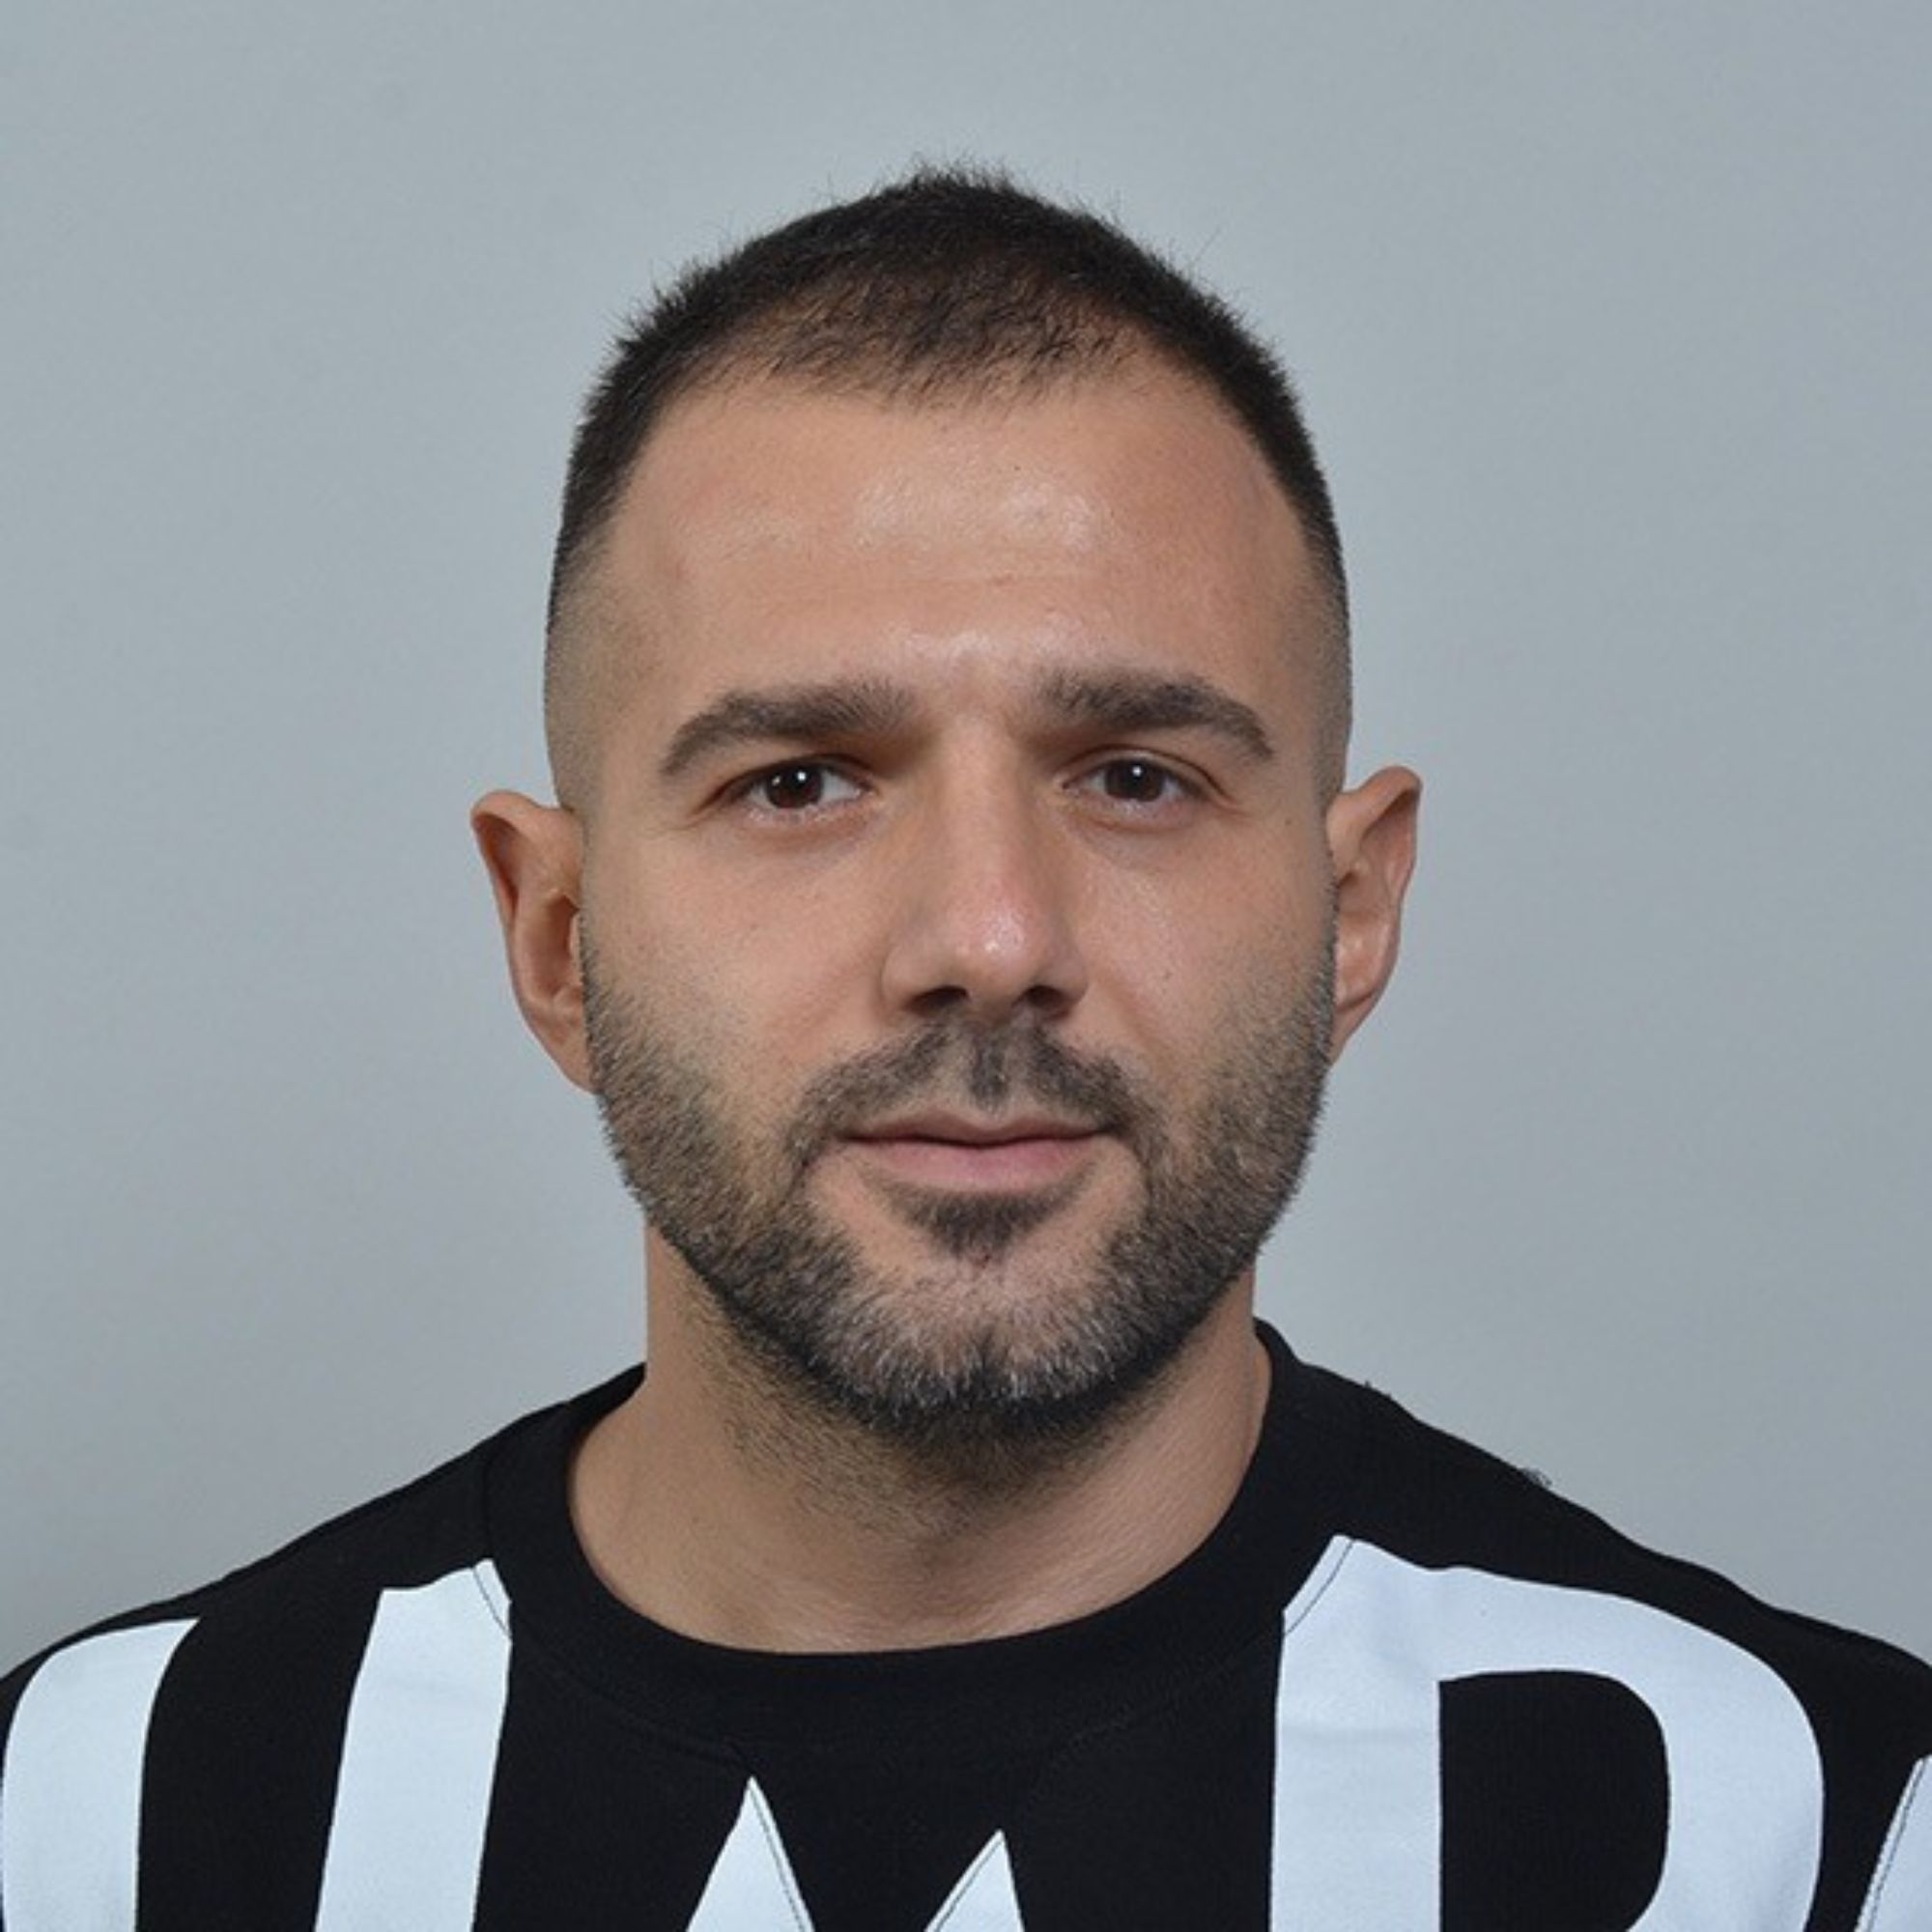 A picture of Seymen Usta, wearing a white and black shirt and standing in front of a gray background